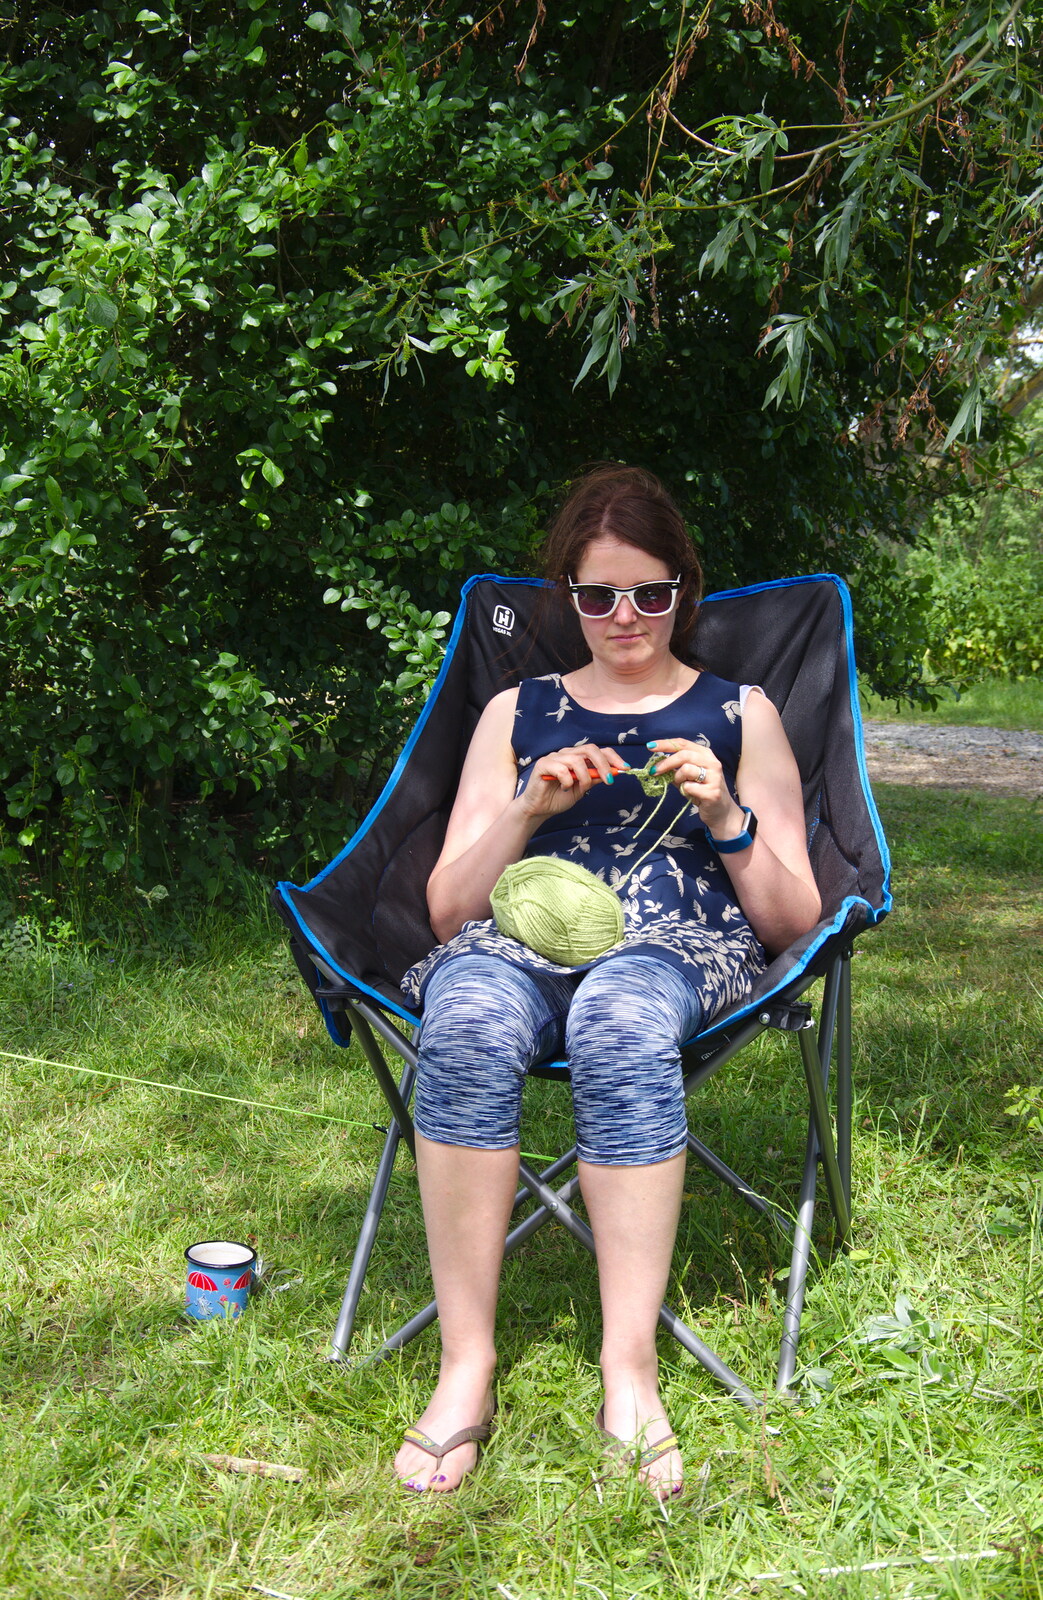 Isobel does some crocheting from Camping at Three Rivers, Geldeston, Norfolk - 1st June 2019